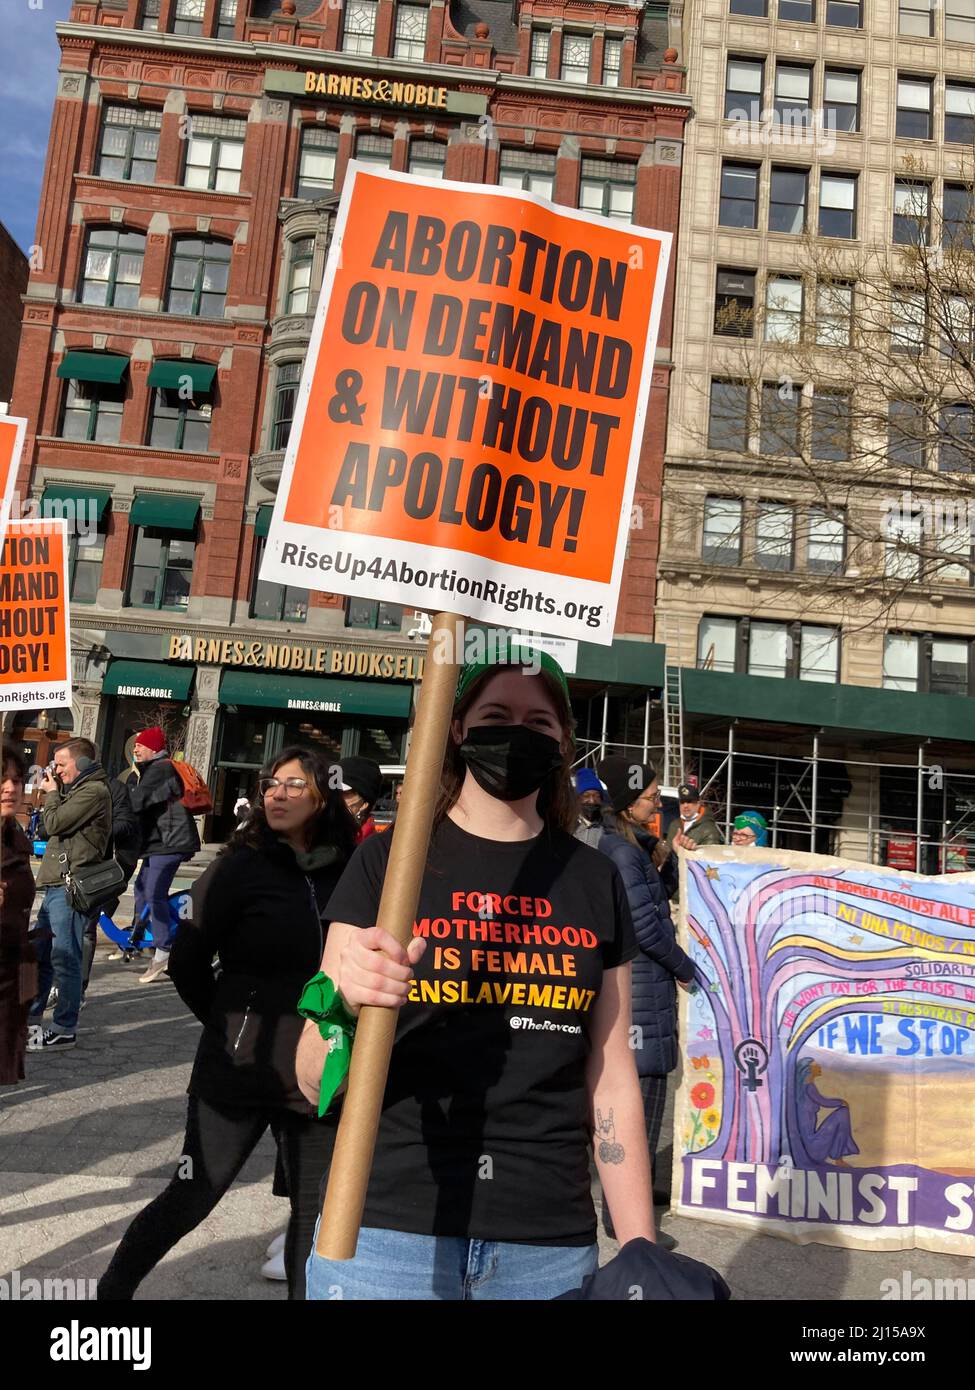 Women gather in Union Square Park in New York on International Women's Day on Tuesday, March 8, 2022. The rally countering the right wing attack on reproductive rights called for abortion on demand and without apology. (© Frances M. Roberts) Stock Photo